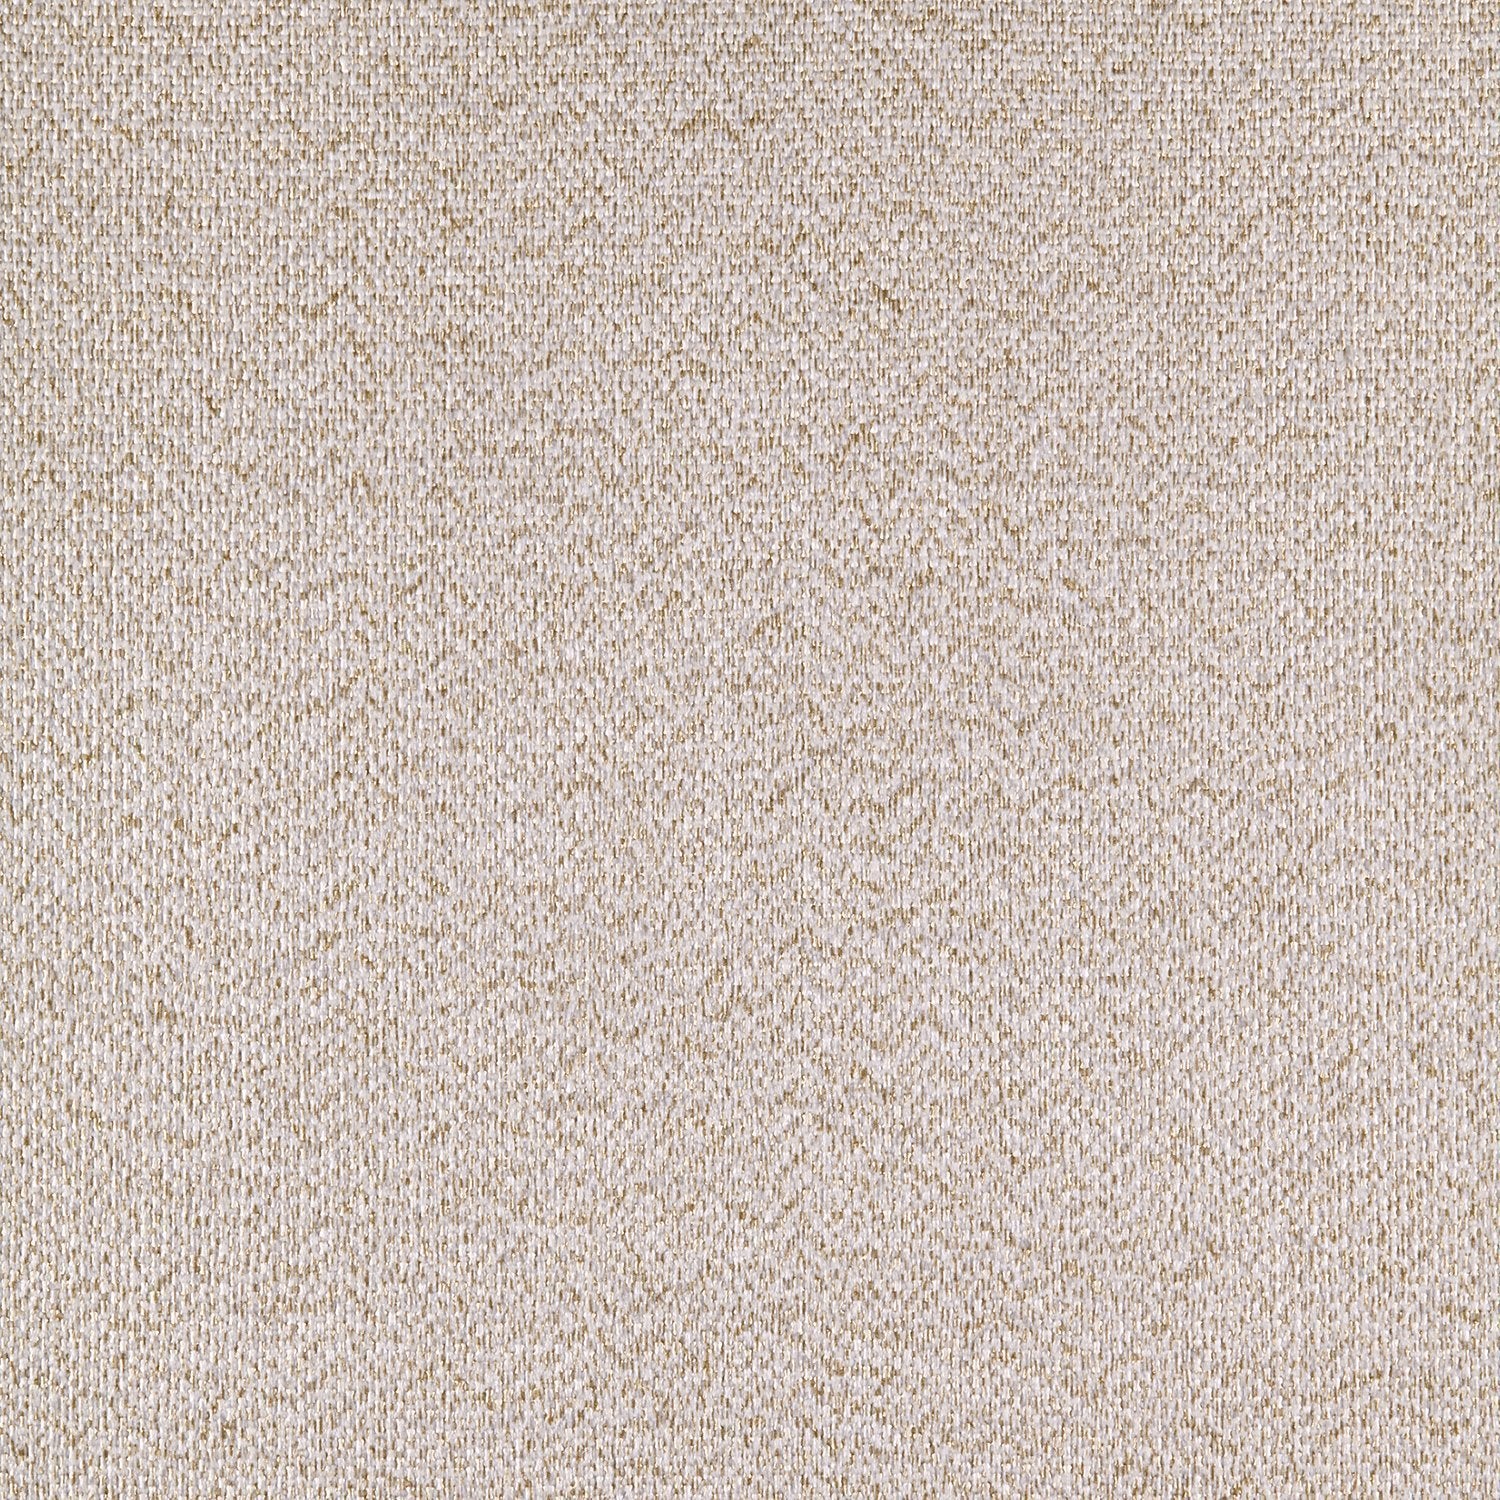 Tweed - Y46945 - Wallcovering - Vycon - Kube Contract